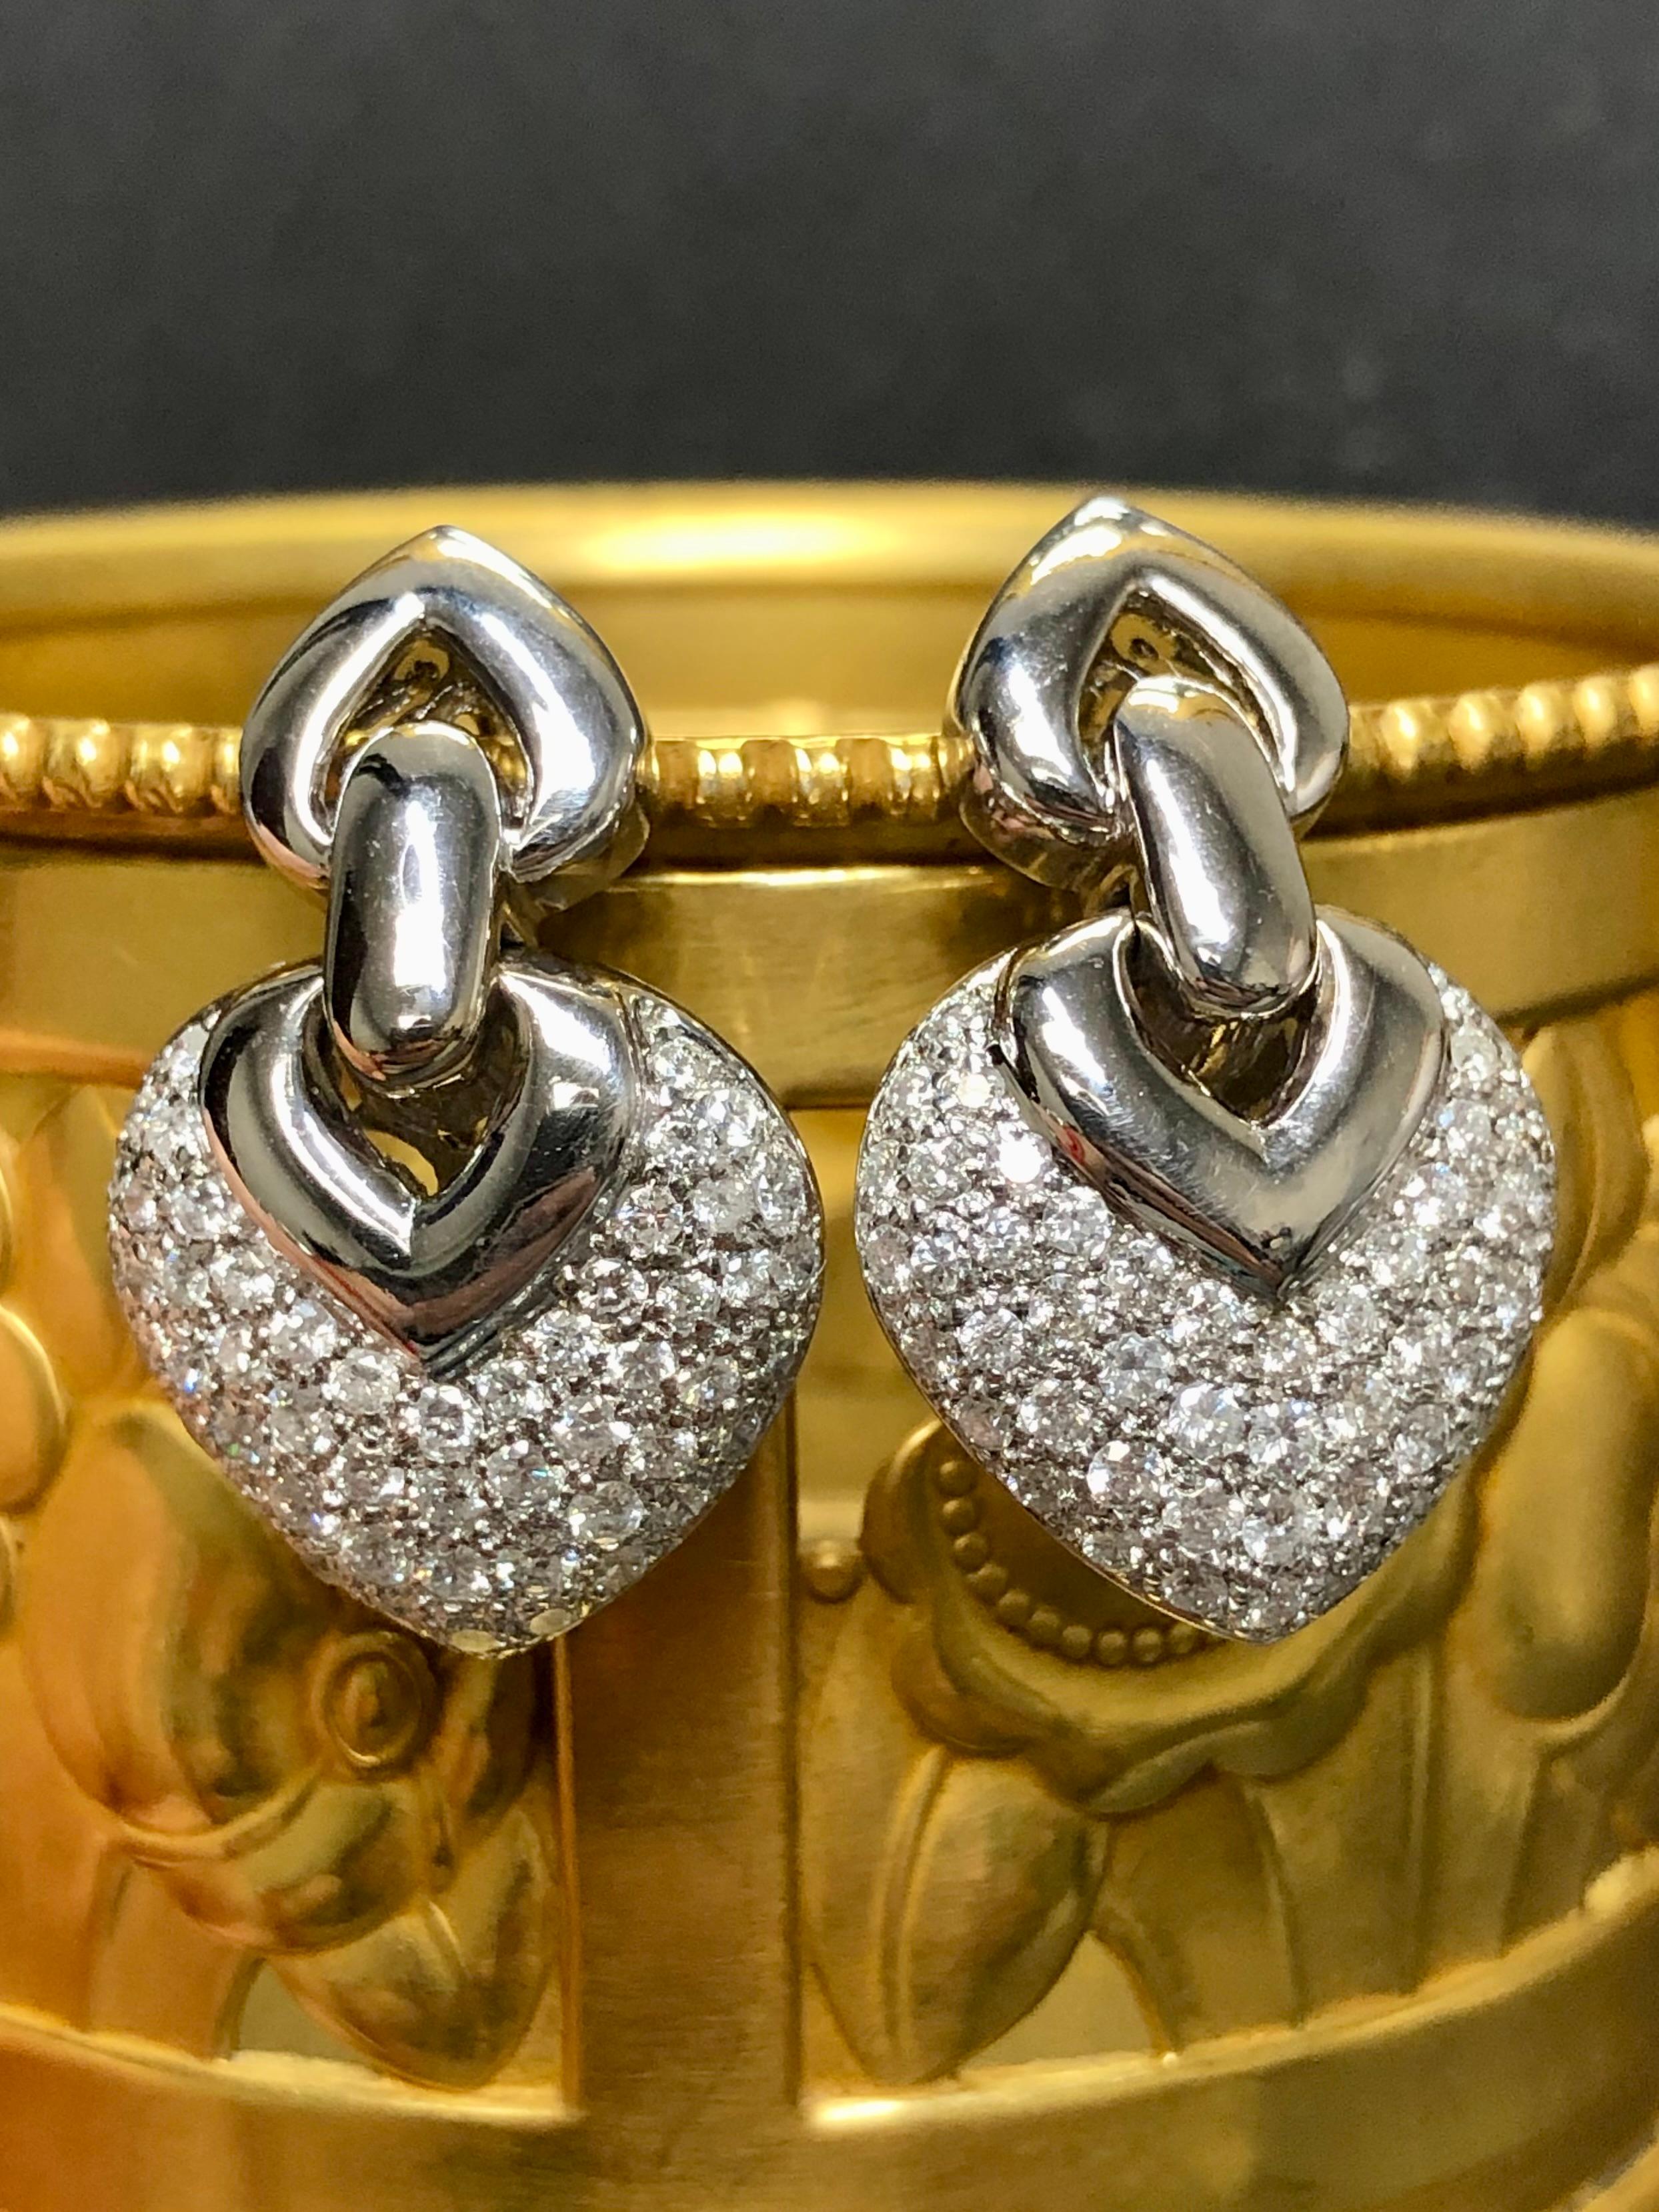 
A classic pair of diamond earrings done in 14K white gold set with approximately 3cttw in G-H color Vs2-Si2 clarity round diamonds. Posts with omega backs.


Dimensions/Weight:

Earrings measure 1.25” x .75” and weigh 15.5g.


Condition:

All